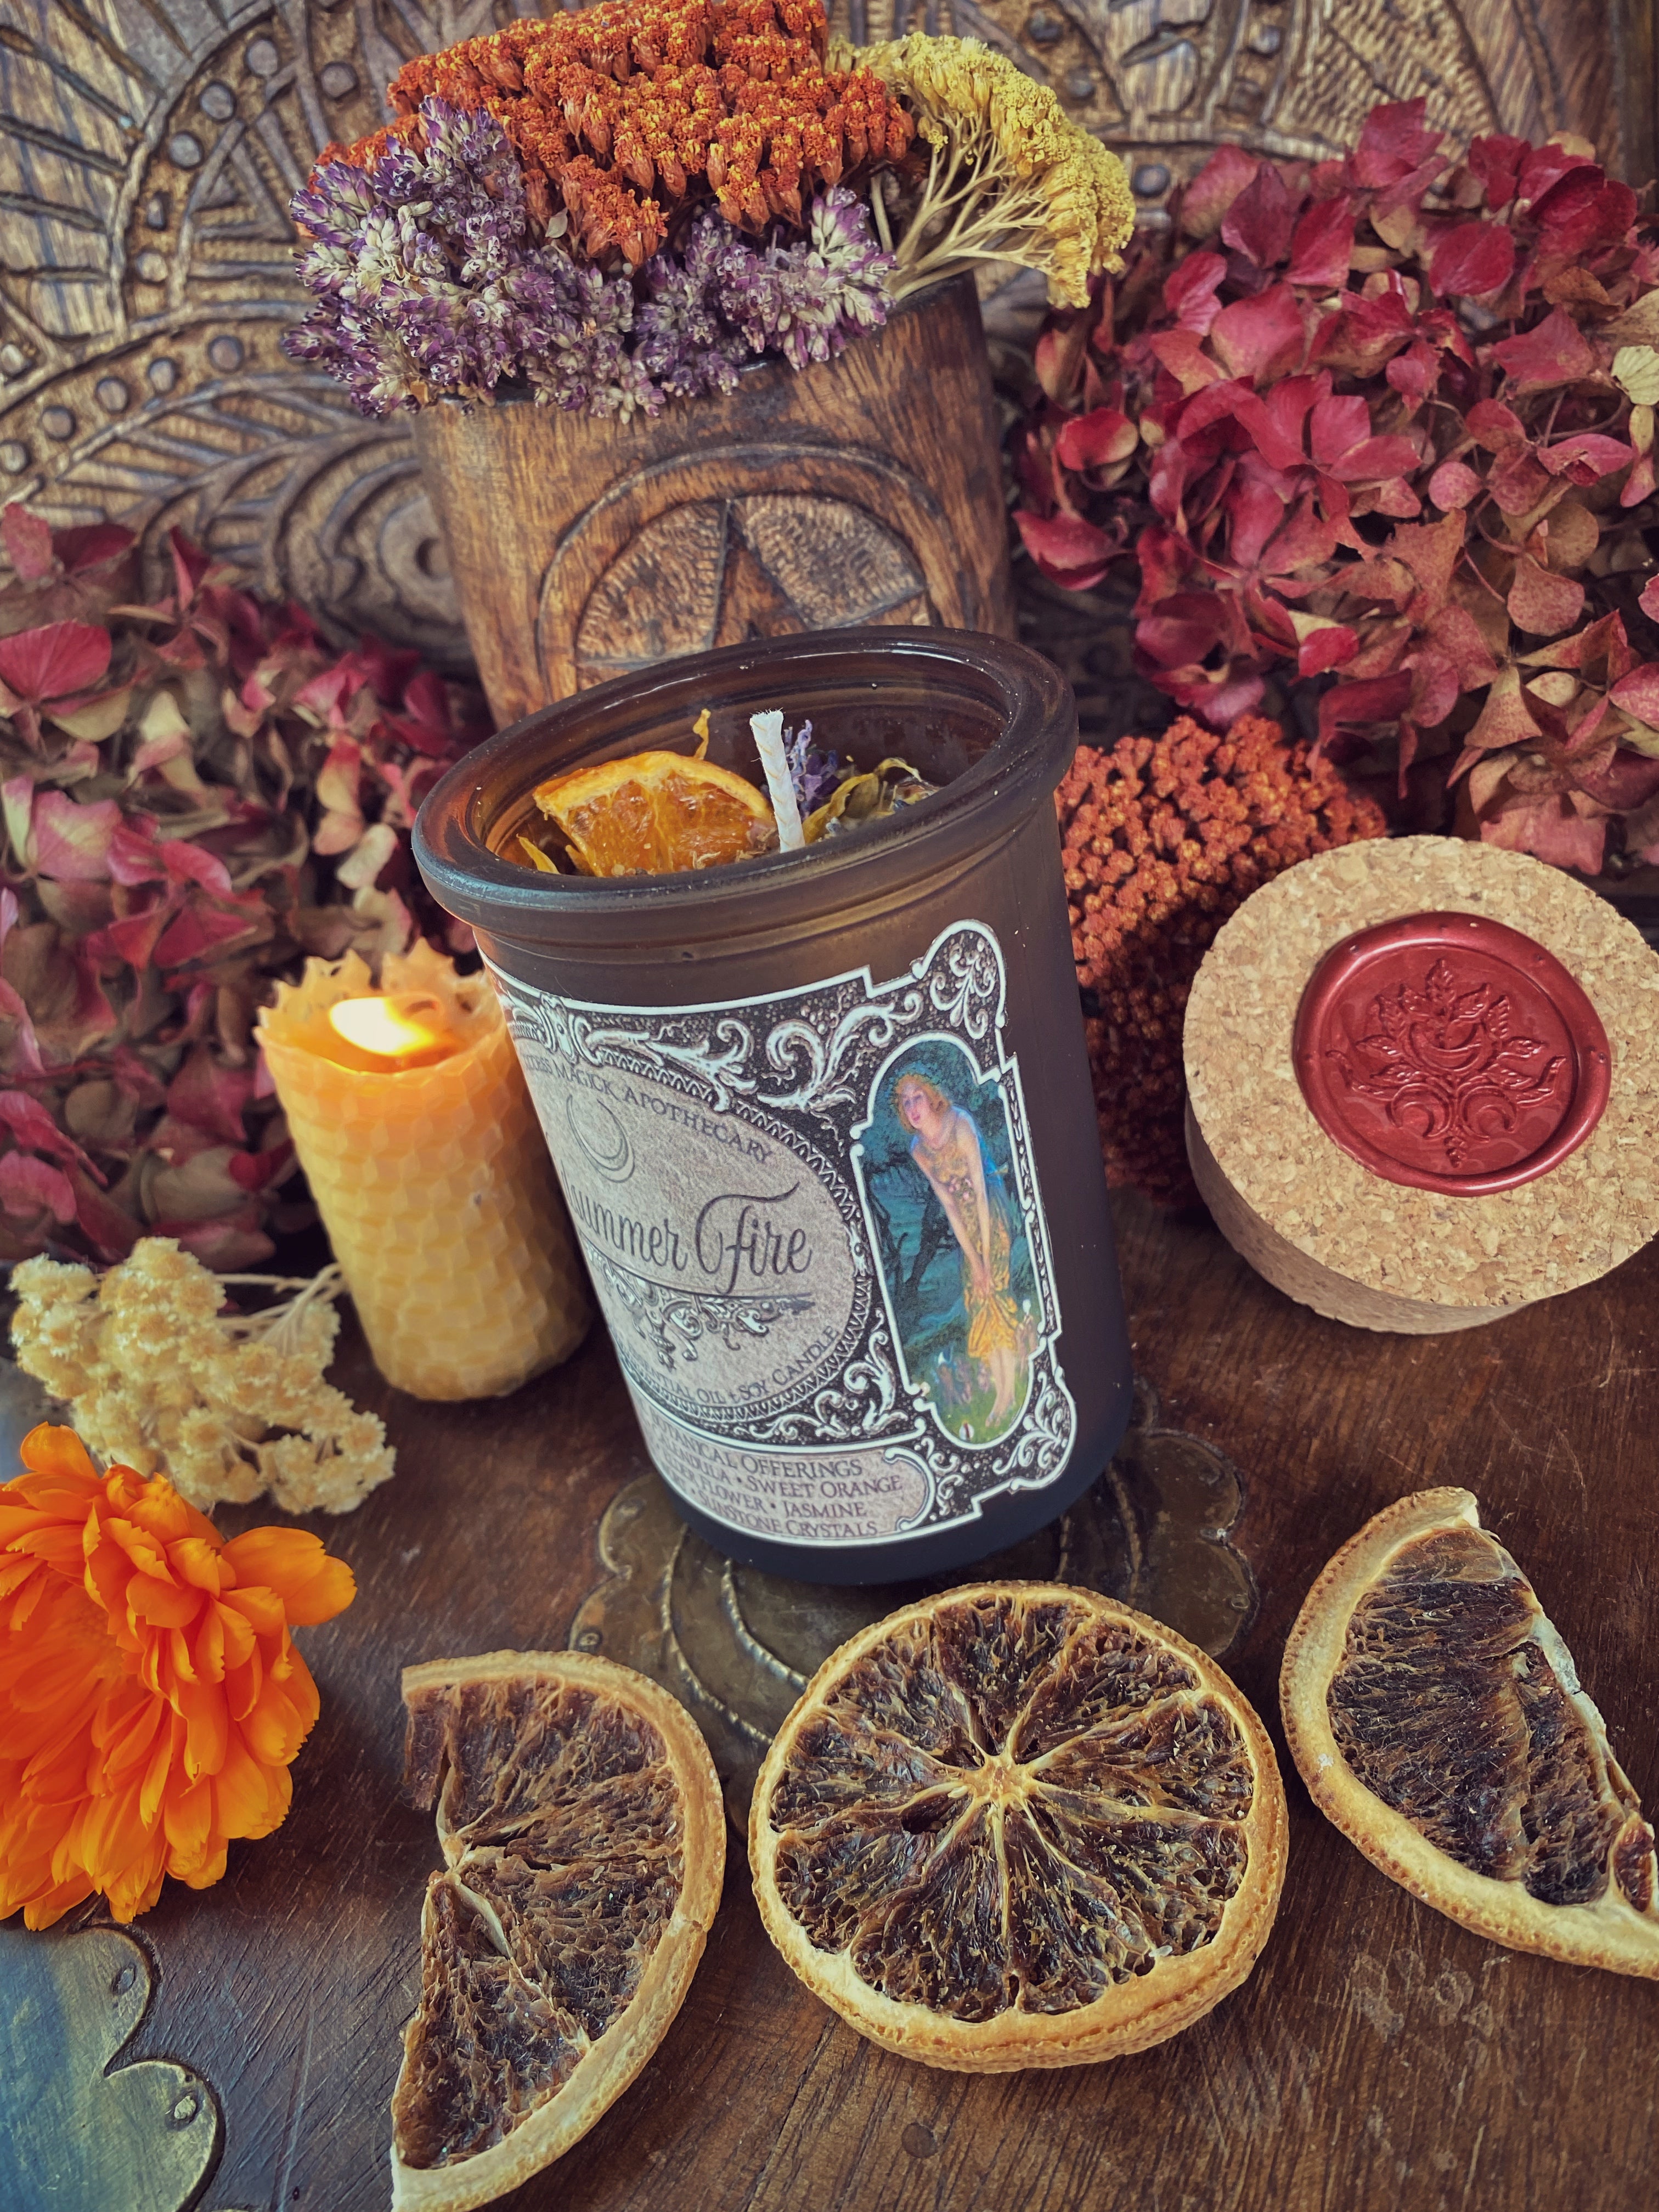 Midsummer Fire Candle // Litha Candle // Summer Solstic Candle // 6 oz // 30 Hour Burn